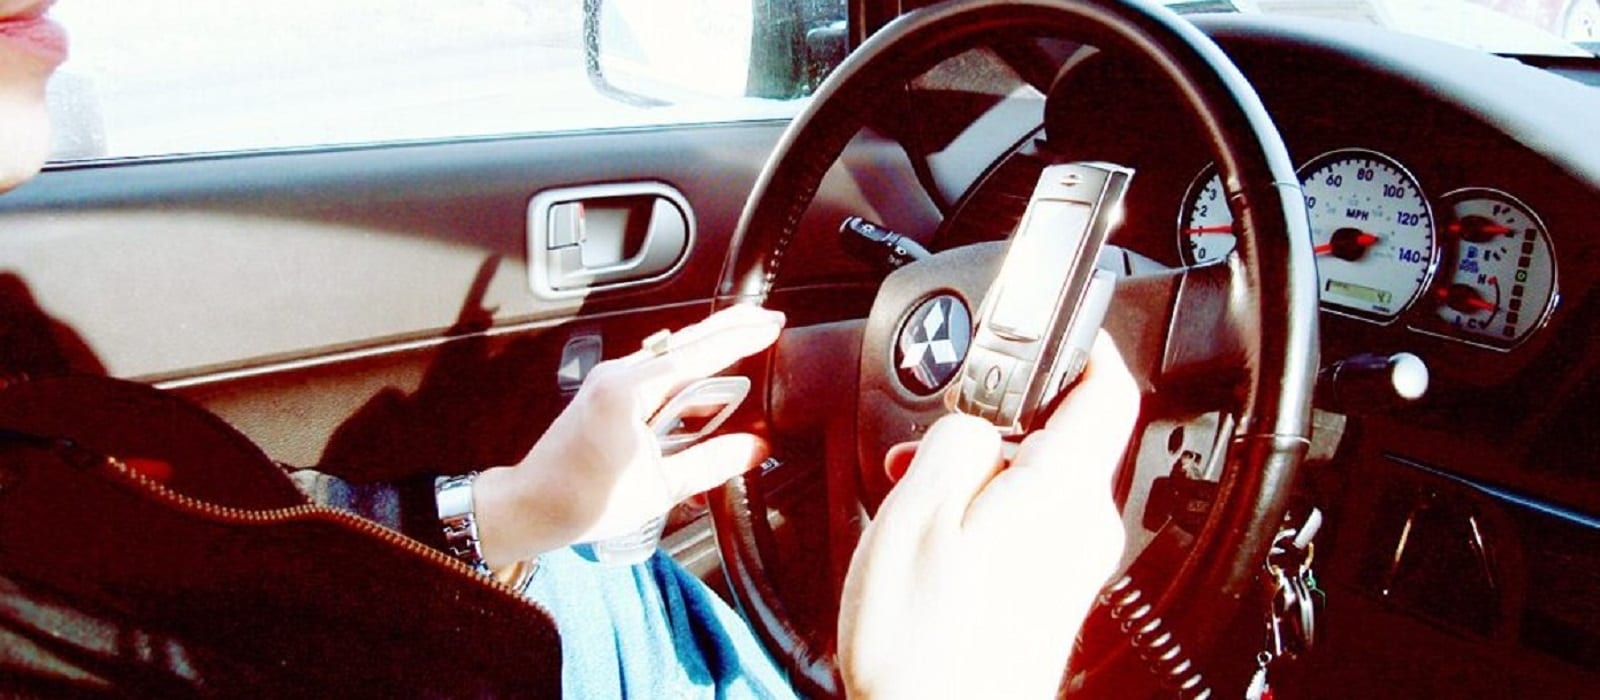 phone-car-distracted-driving